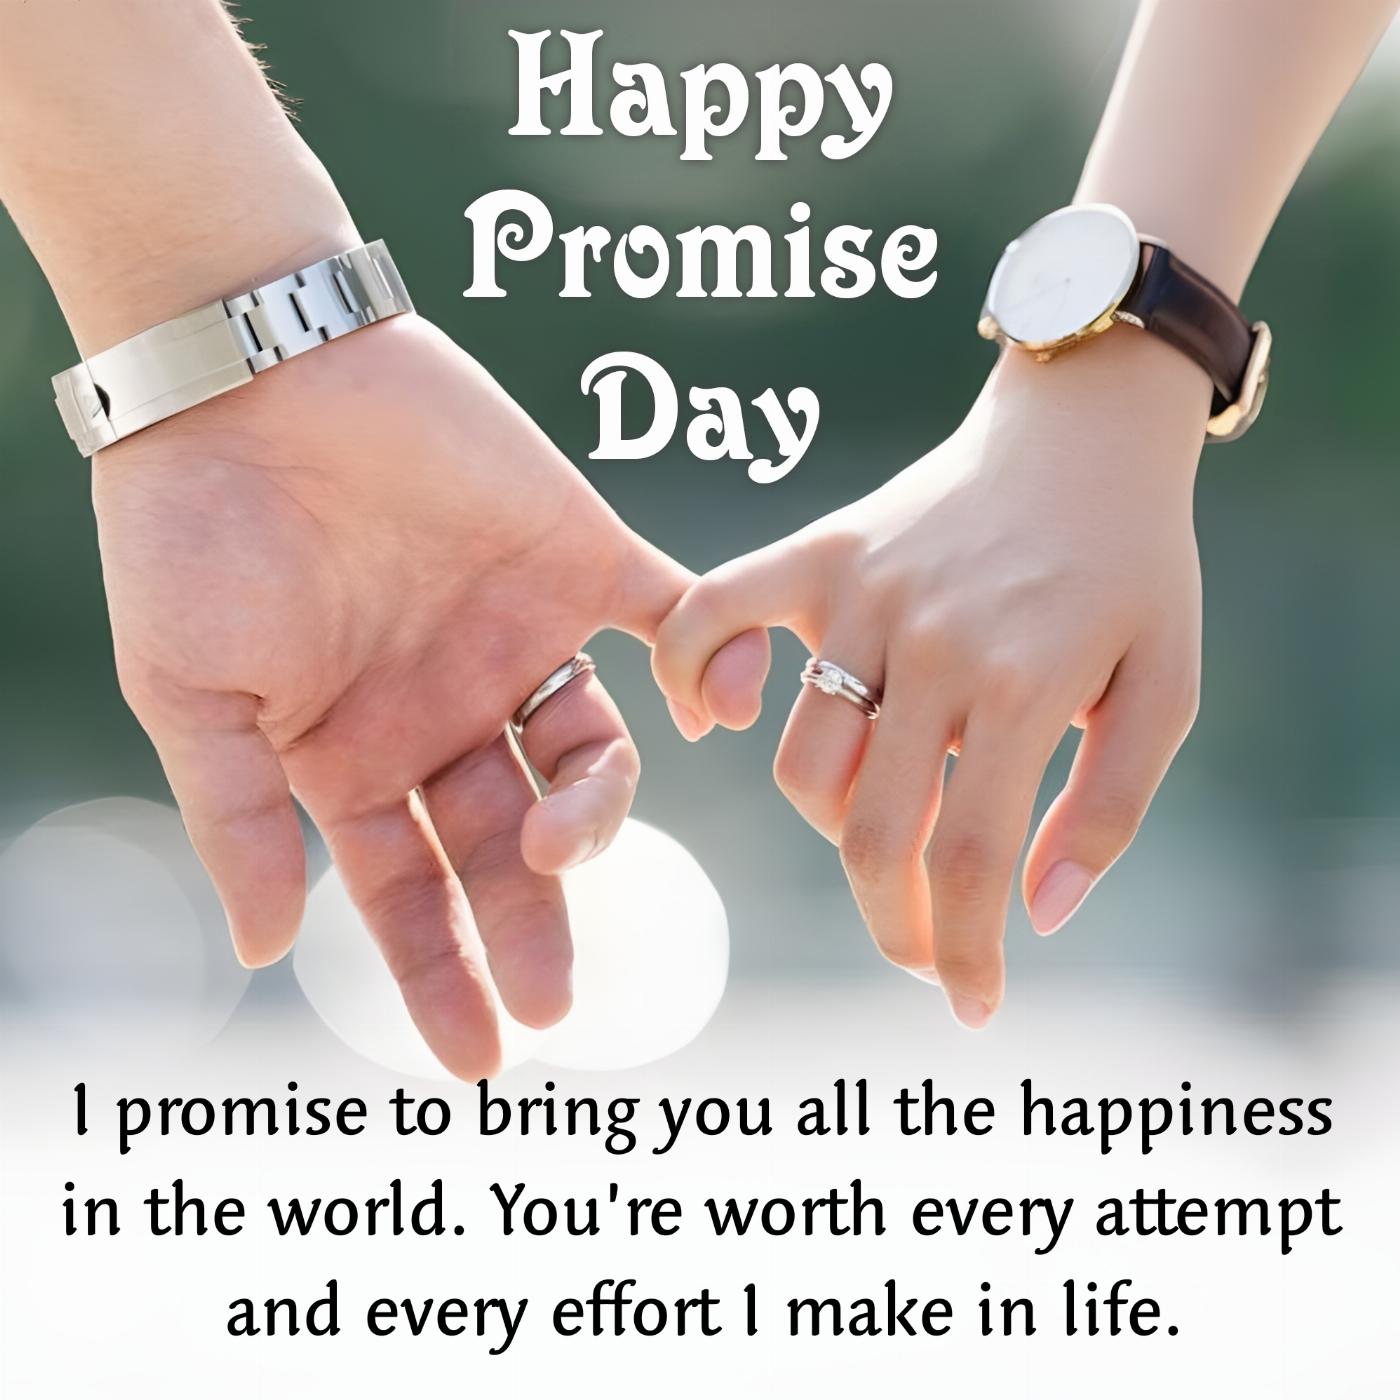 I promise to bring you all the happiness in the world